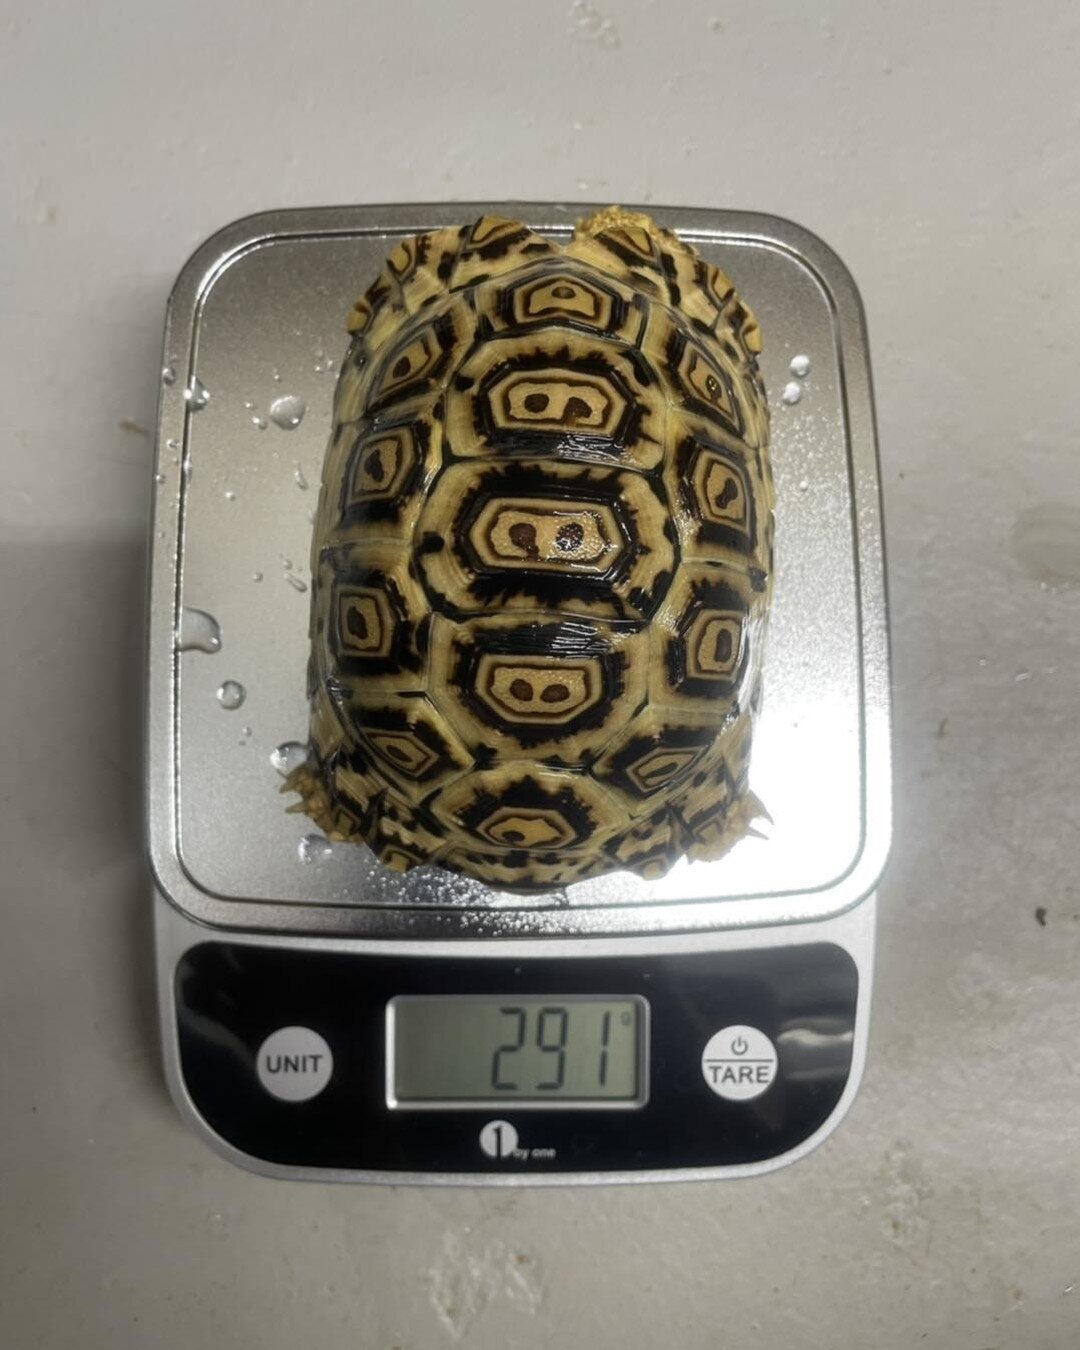 Weigh ins! Tracking weight regularly is one of the best ways to monitor health in reptiles. These unsexed South African leopard tortoises are all growing beautifully. 
*
*
*
#tortoise #leopardtortoise #leopardtortoises #southafricanleopardtortoise #s